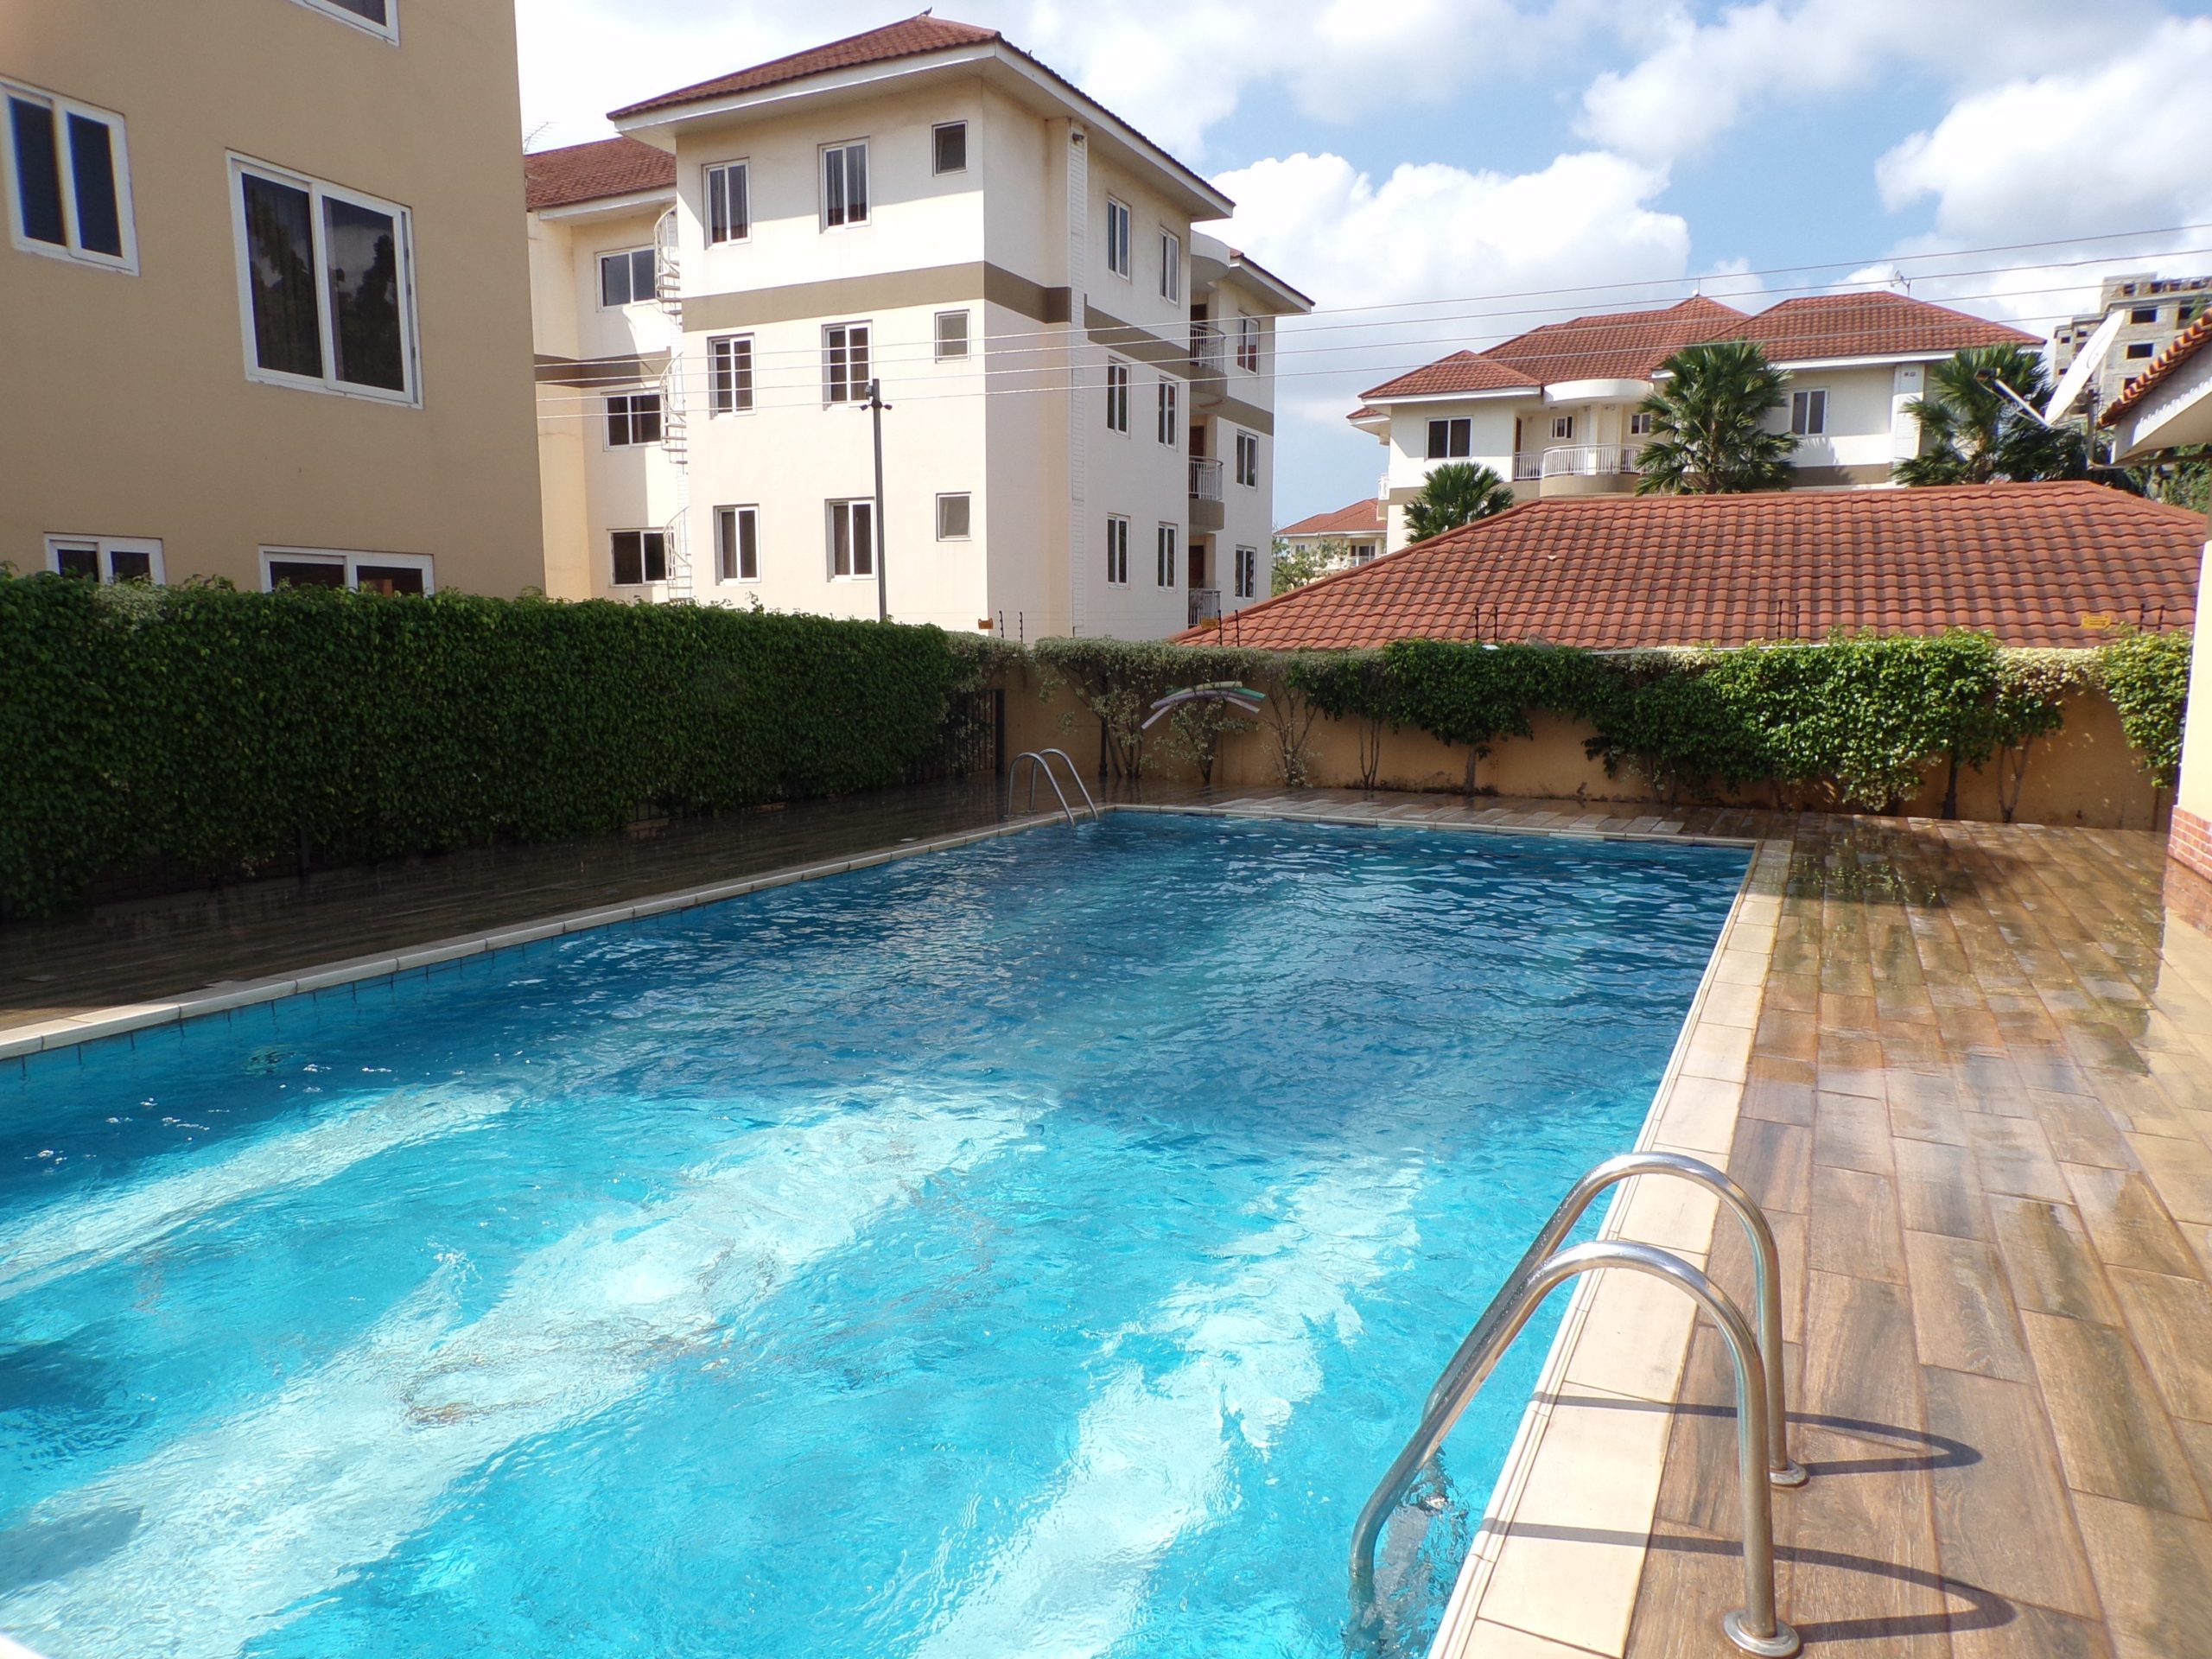 3 BEDROOM APARTMENT FOR RENT AT AIRPORT RESIDENTIAL AREA